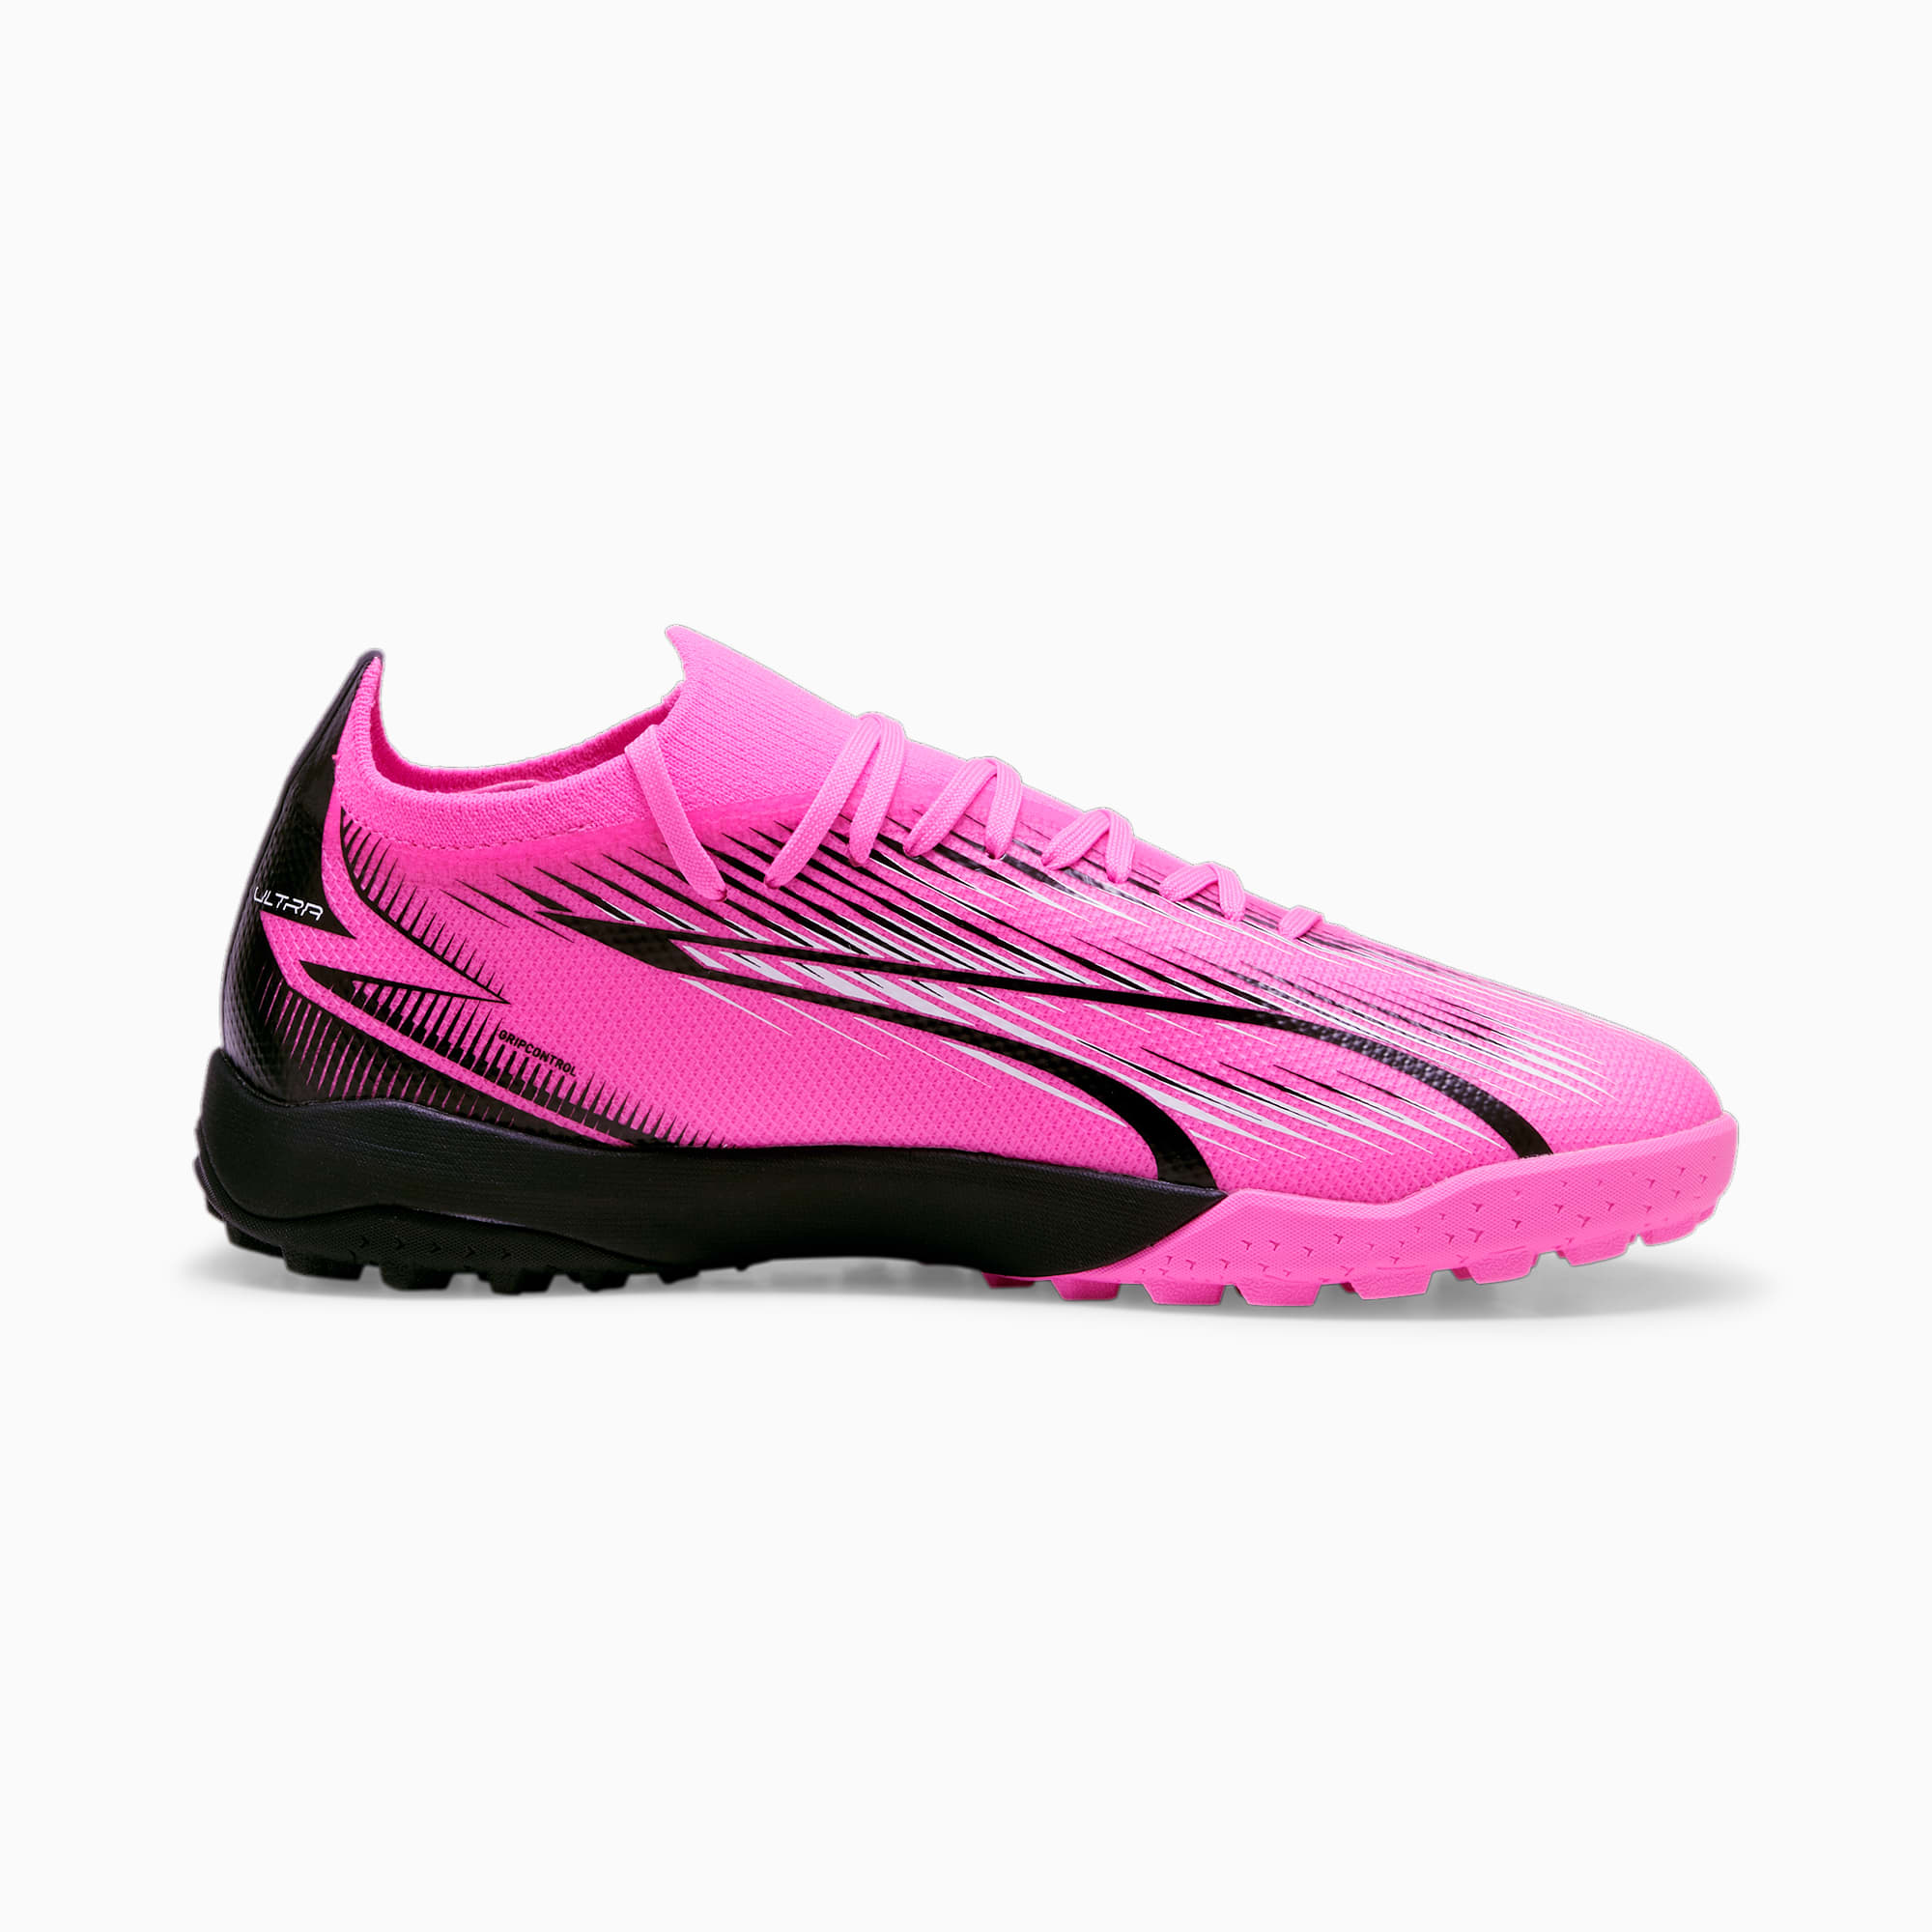 ULTRA MATCH Turf Trainer Men's Soccer Cleats